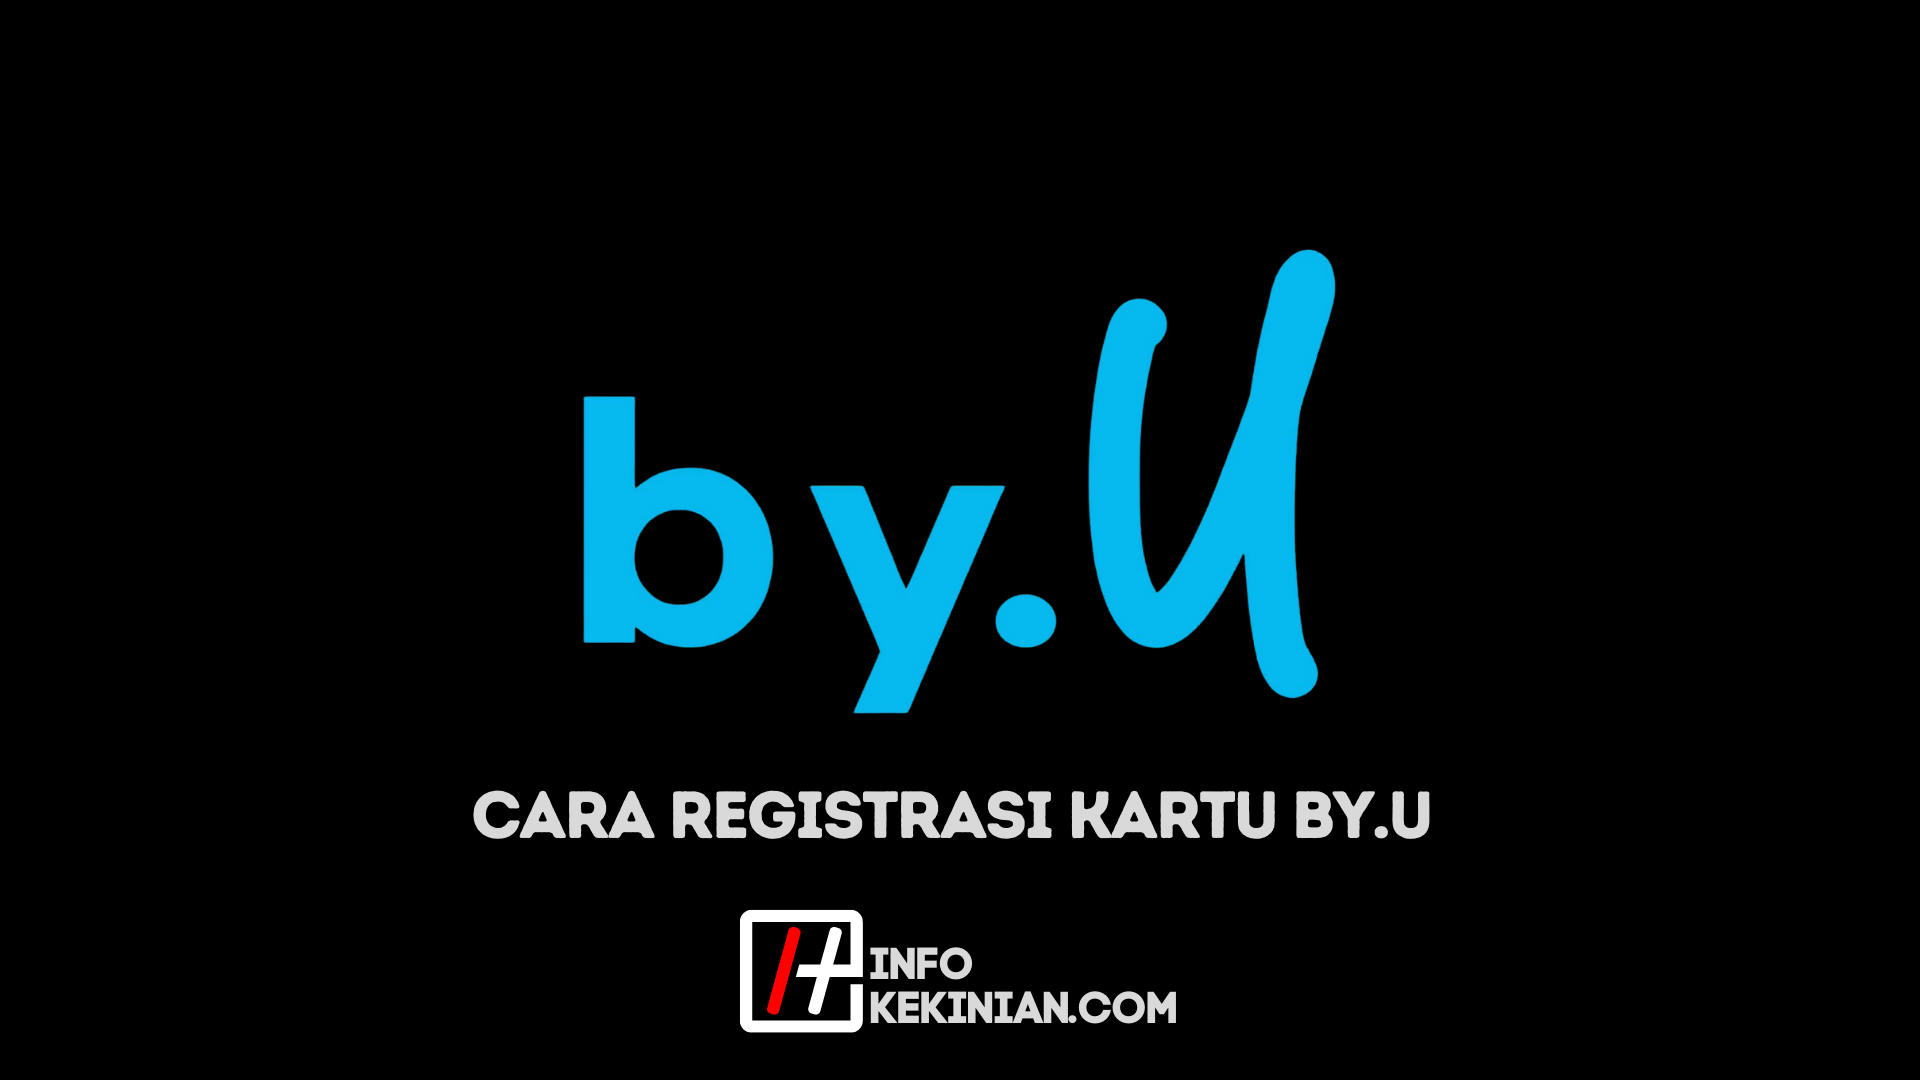 What is Card Registration by.U 